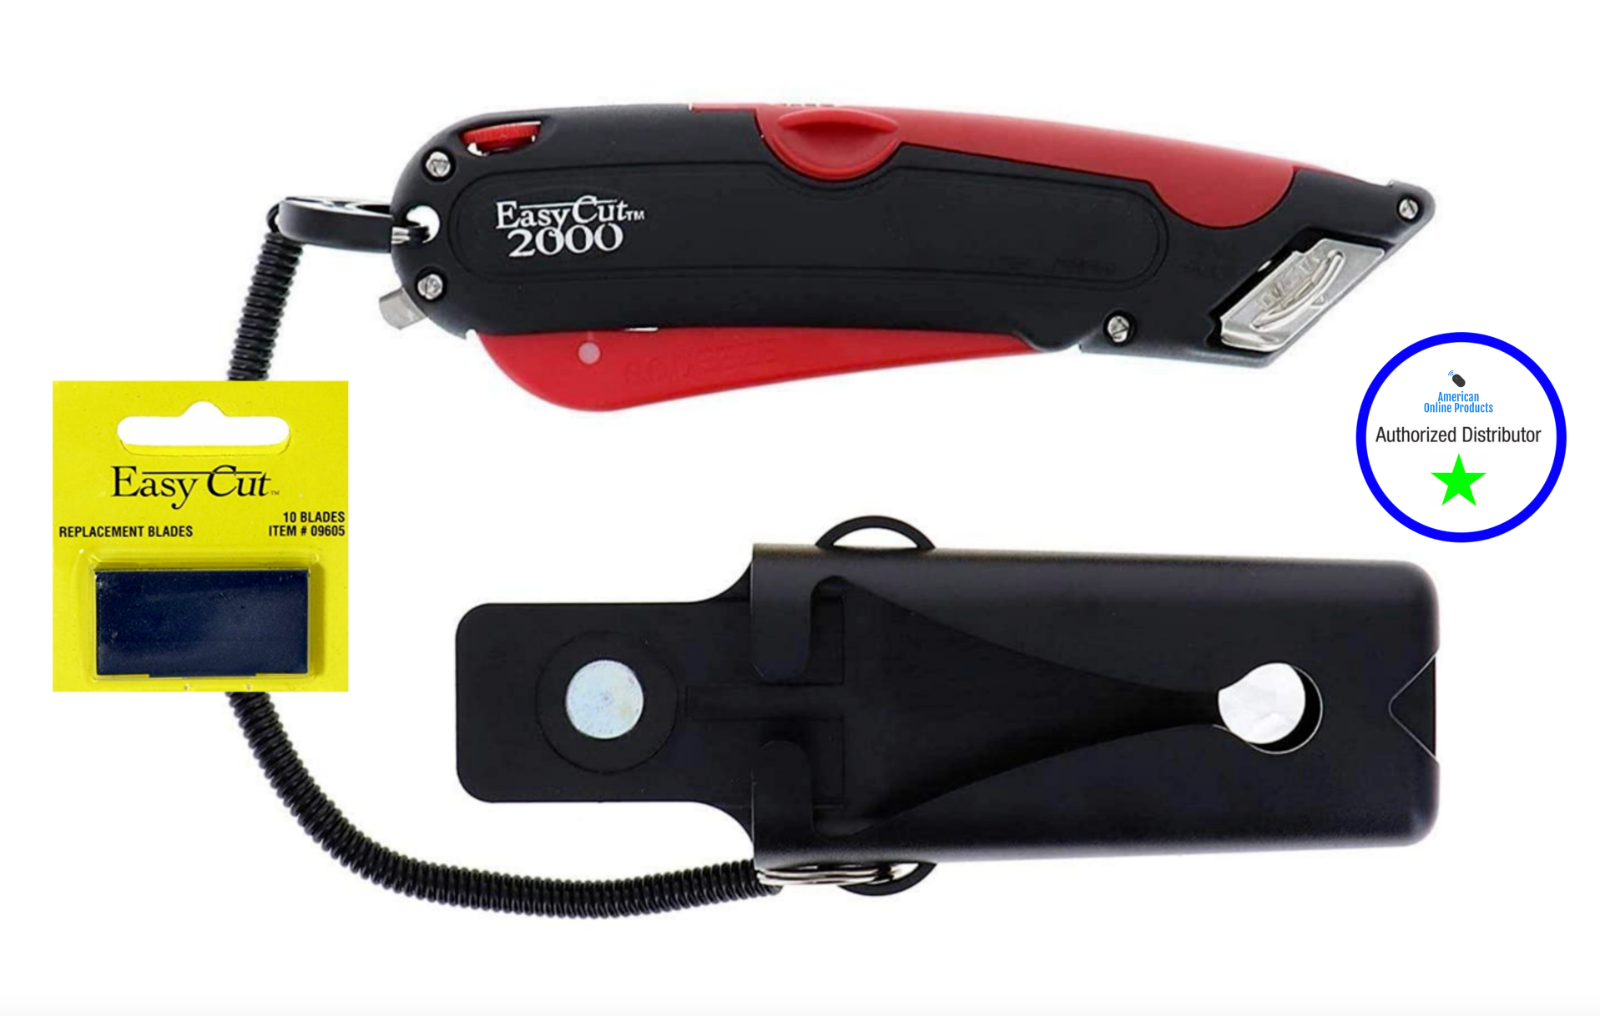 Easy Cut 2000 Red Safety Box Cutter Knife Easycut & Pack 0f 10 Blades Best Deal